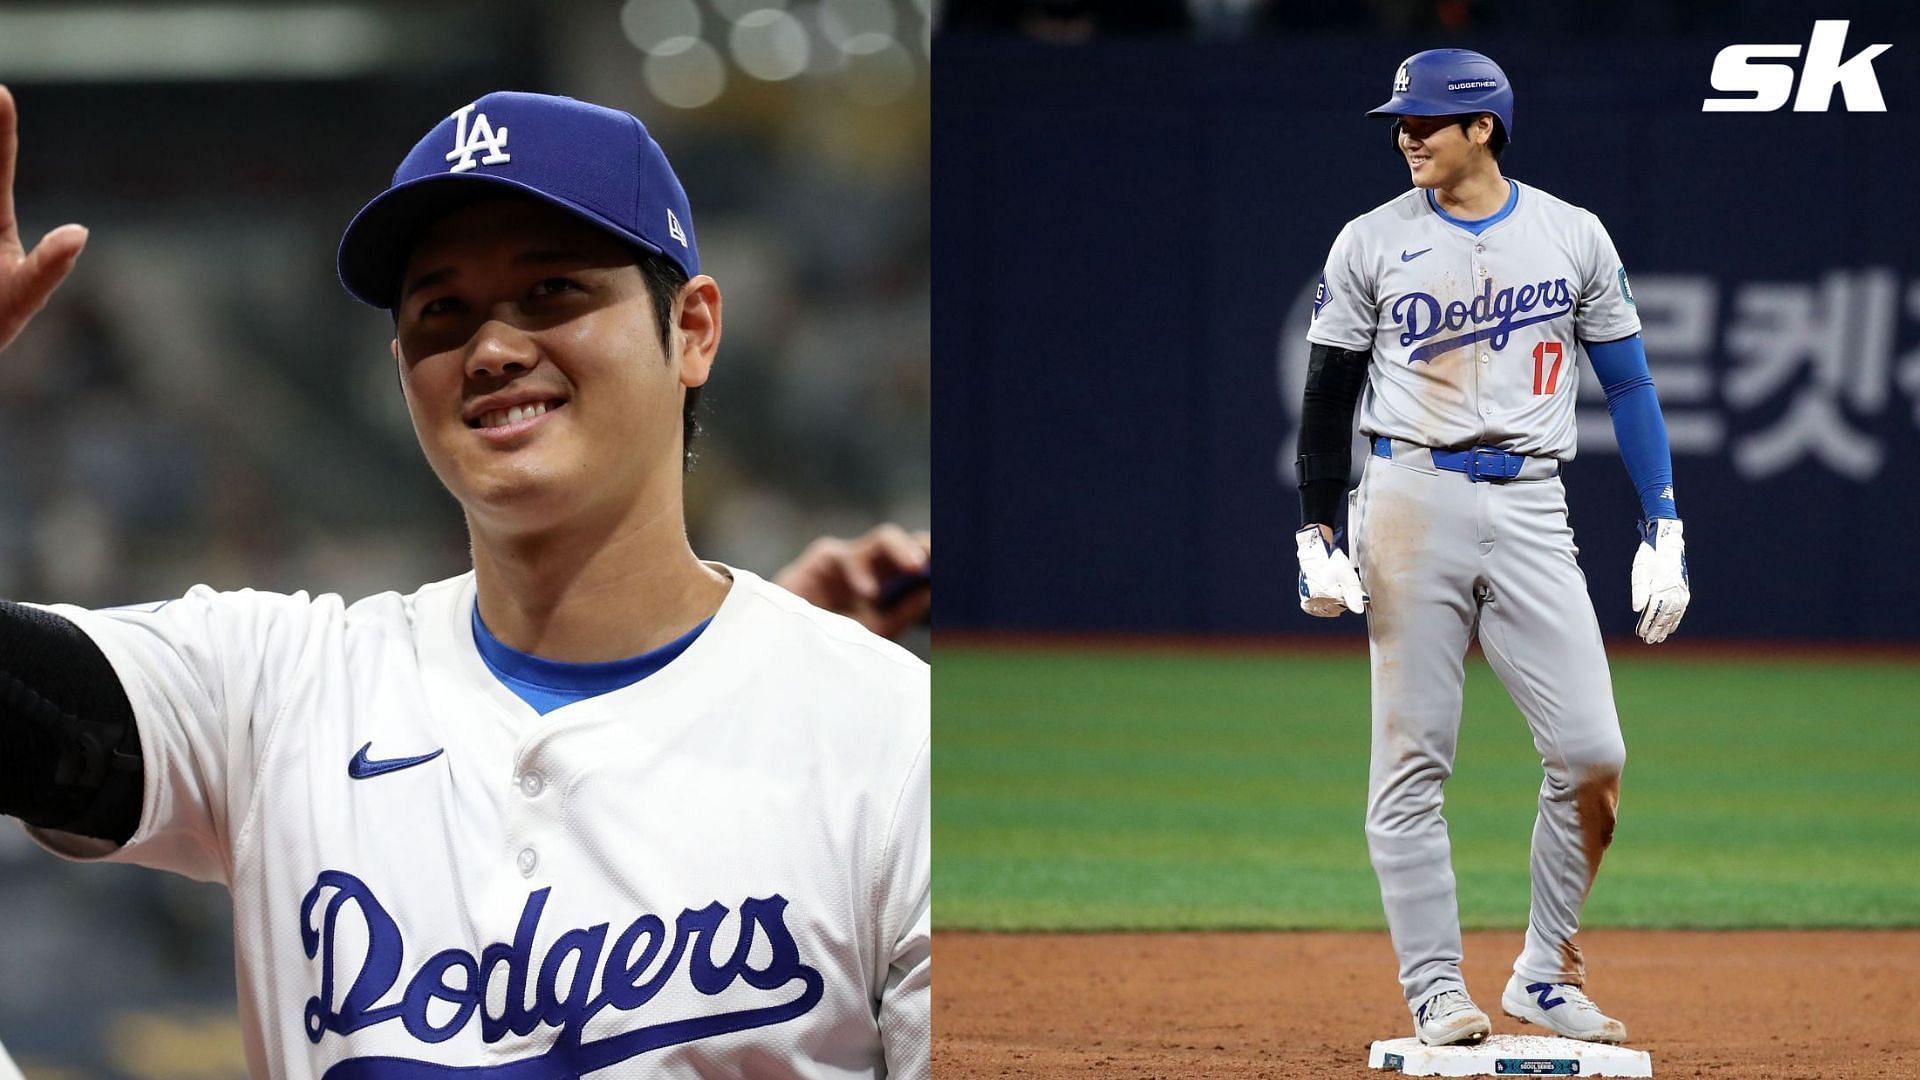 Shohei Ohtani was impressed with Dodgers ability to comeback and win against Padres during first game of Seoul Series